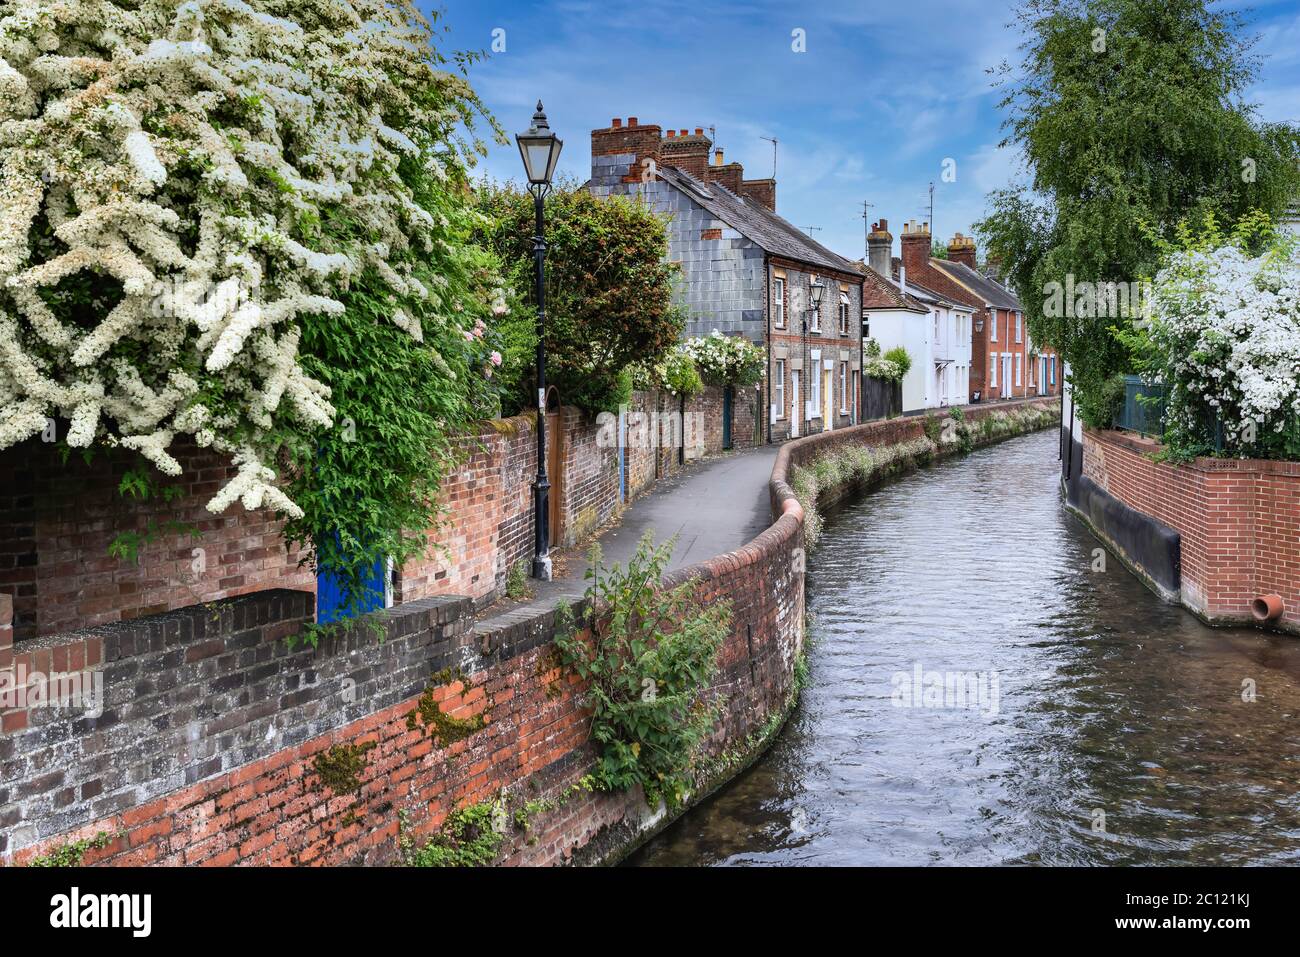 A canal with homes in the city of Salisbury, Wiltshire, England, Great Britain, Europe. Stock Photo